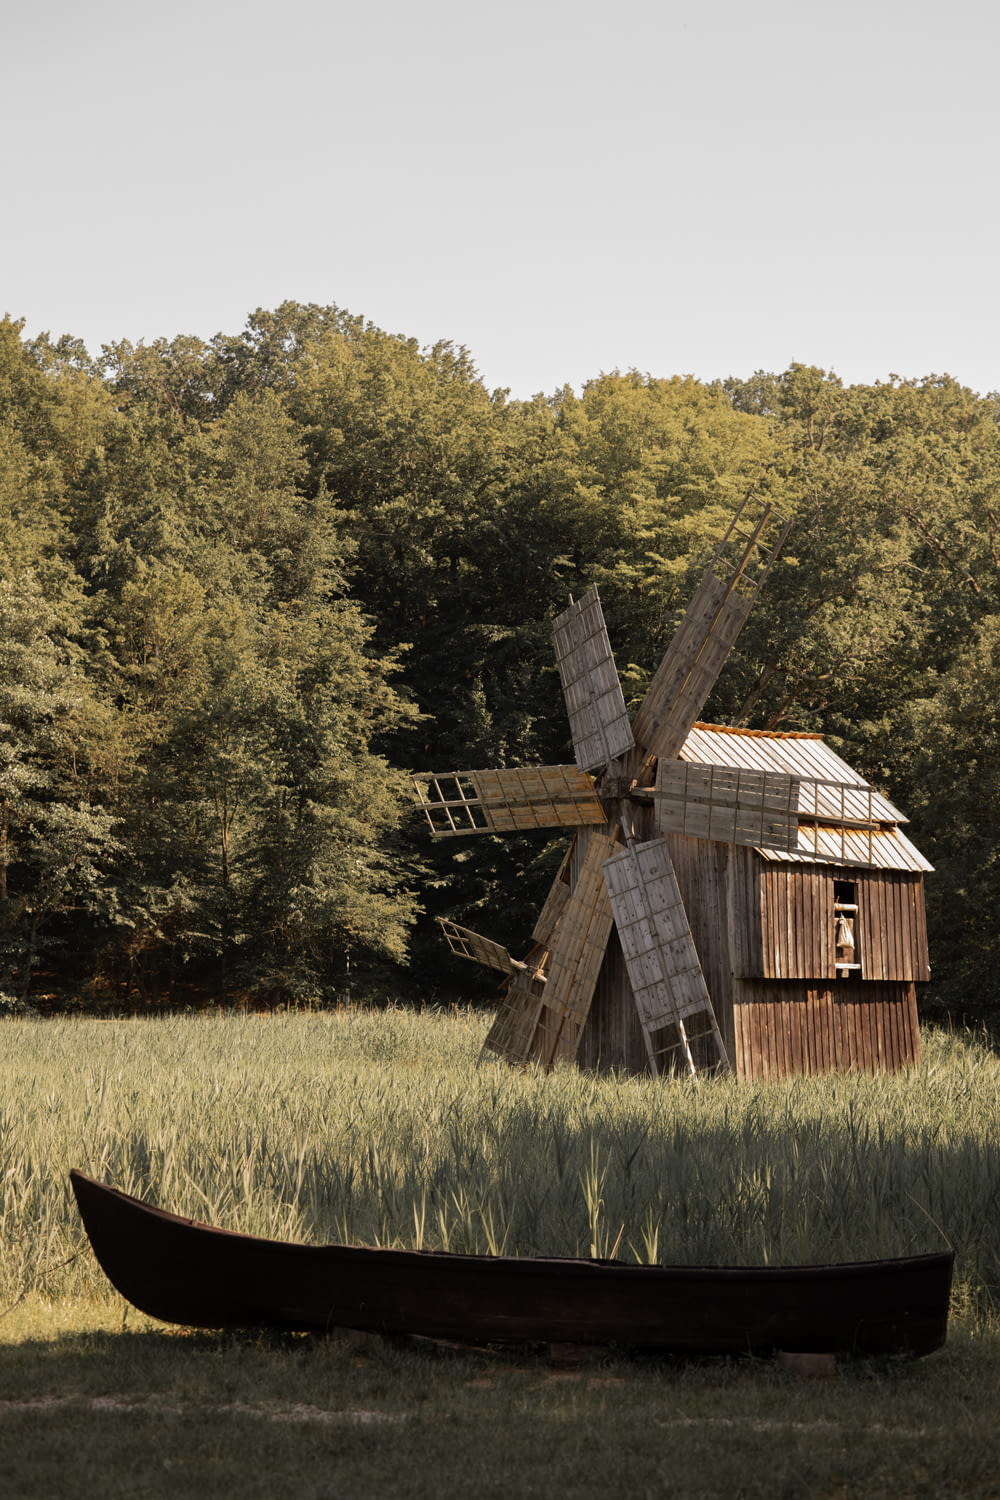 a boat sitting in a field next to a windmill